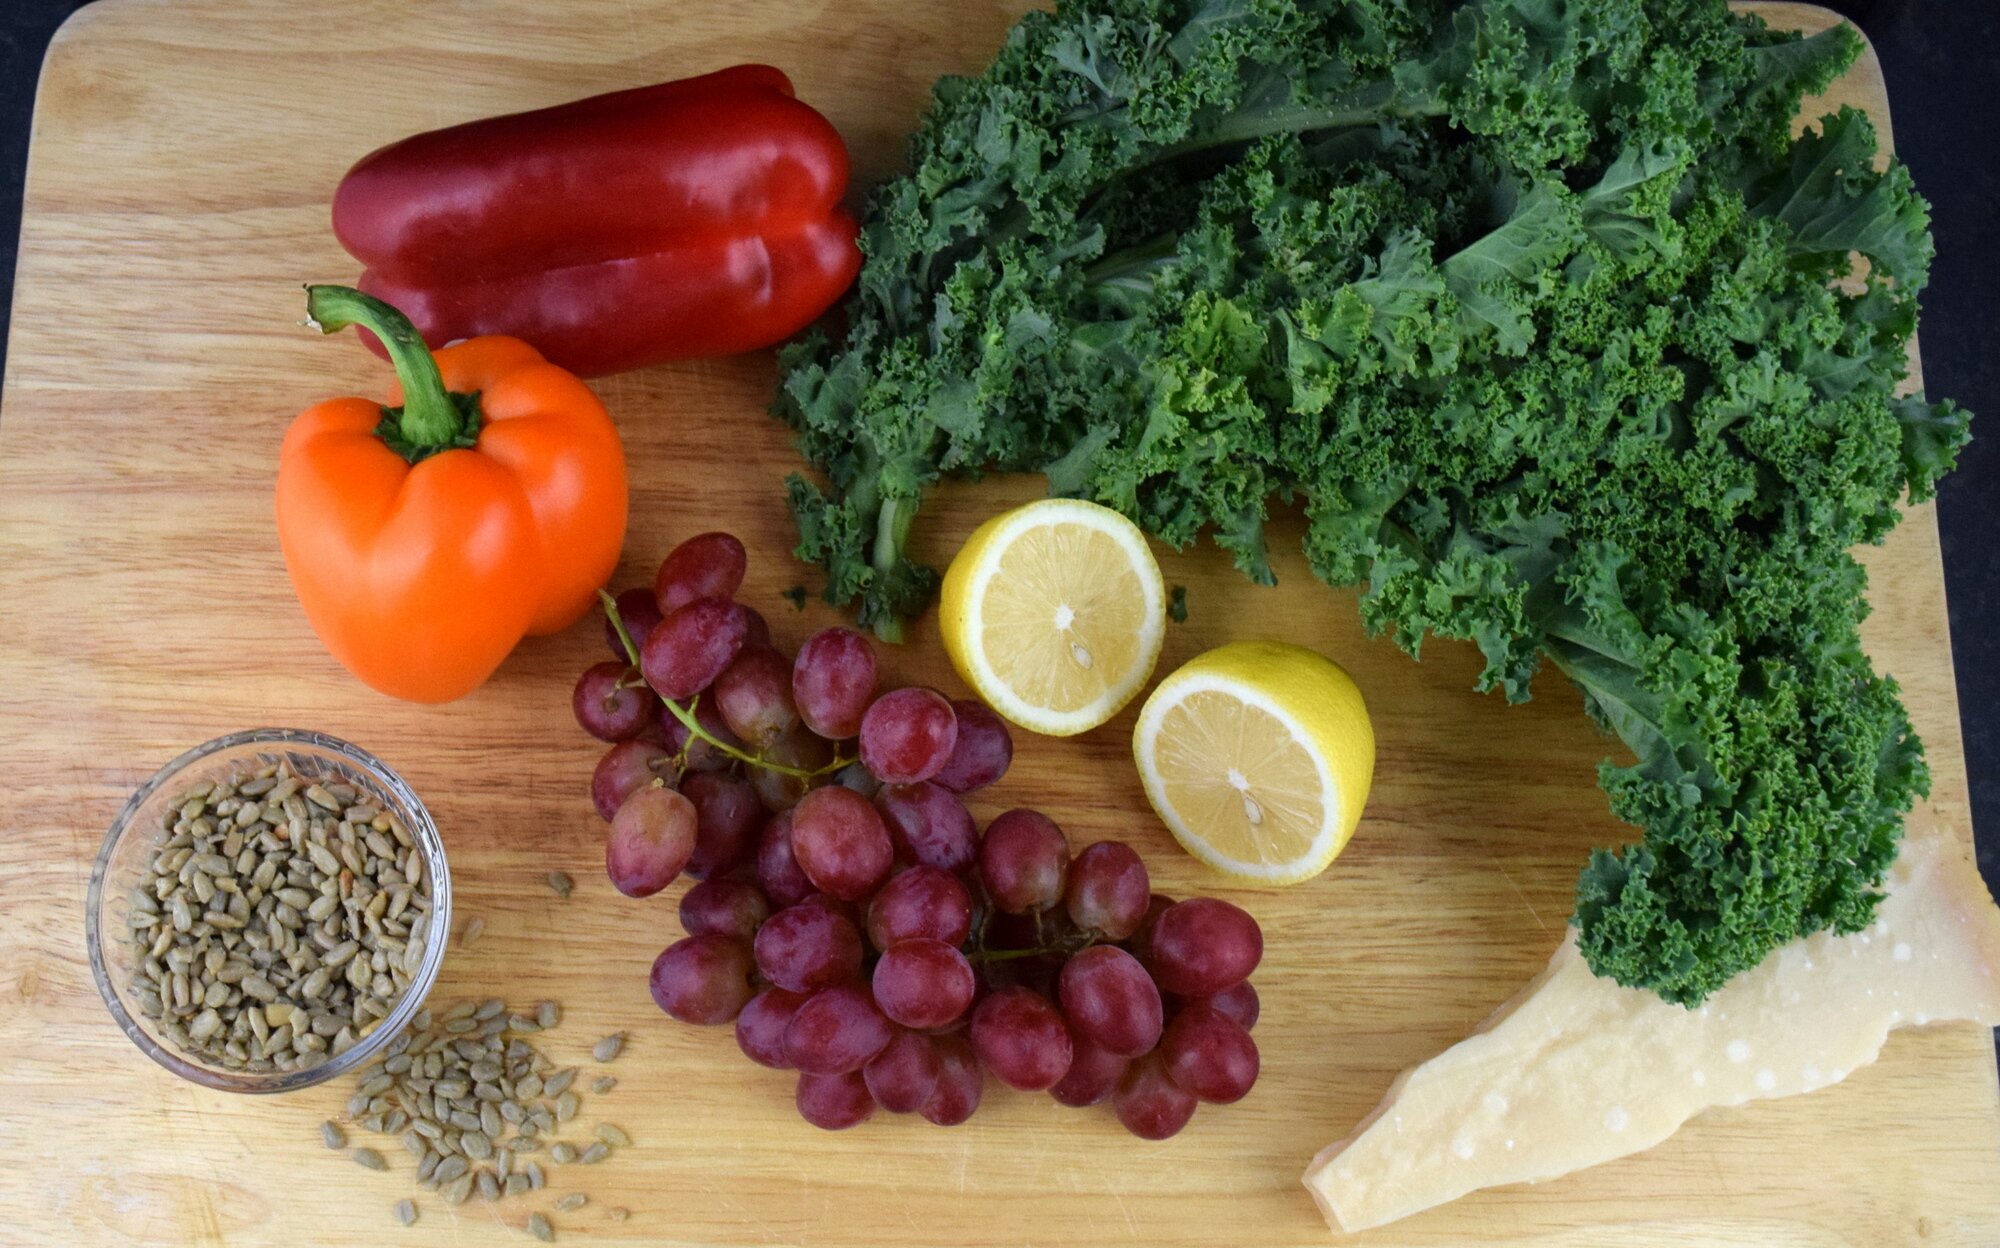 Kale, Grape and Quinoa Salad  (Inspired by the Cheesecake Factory)